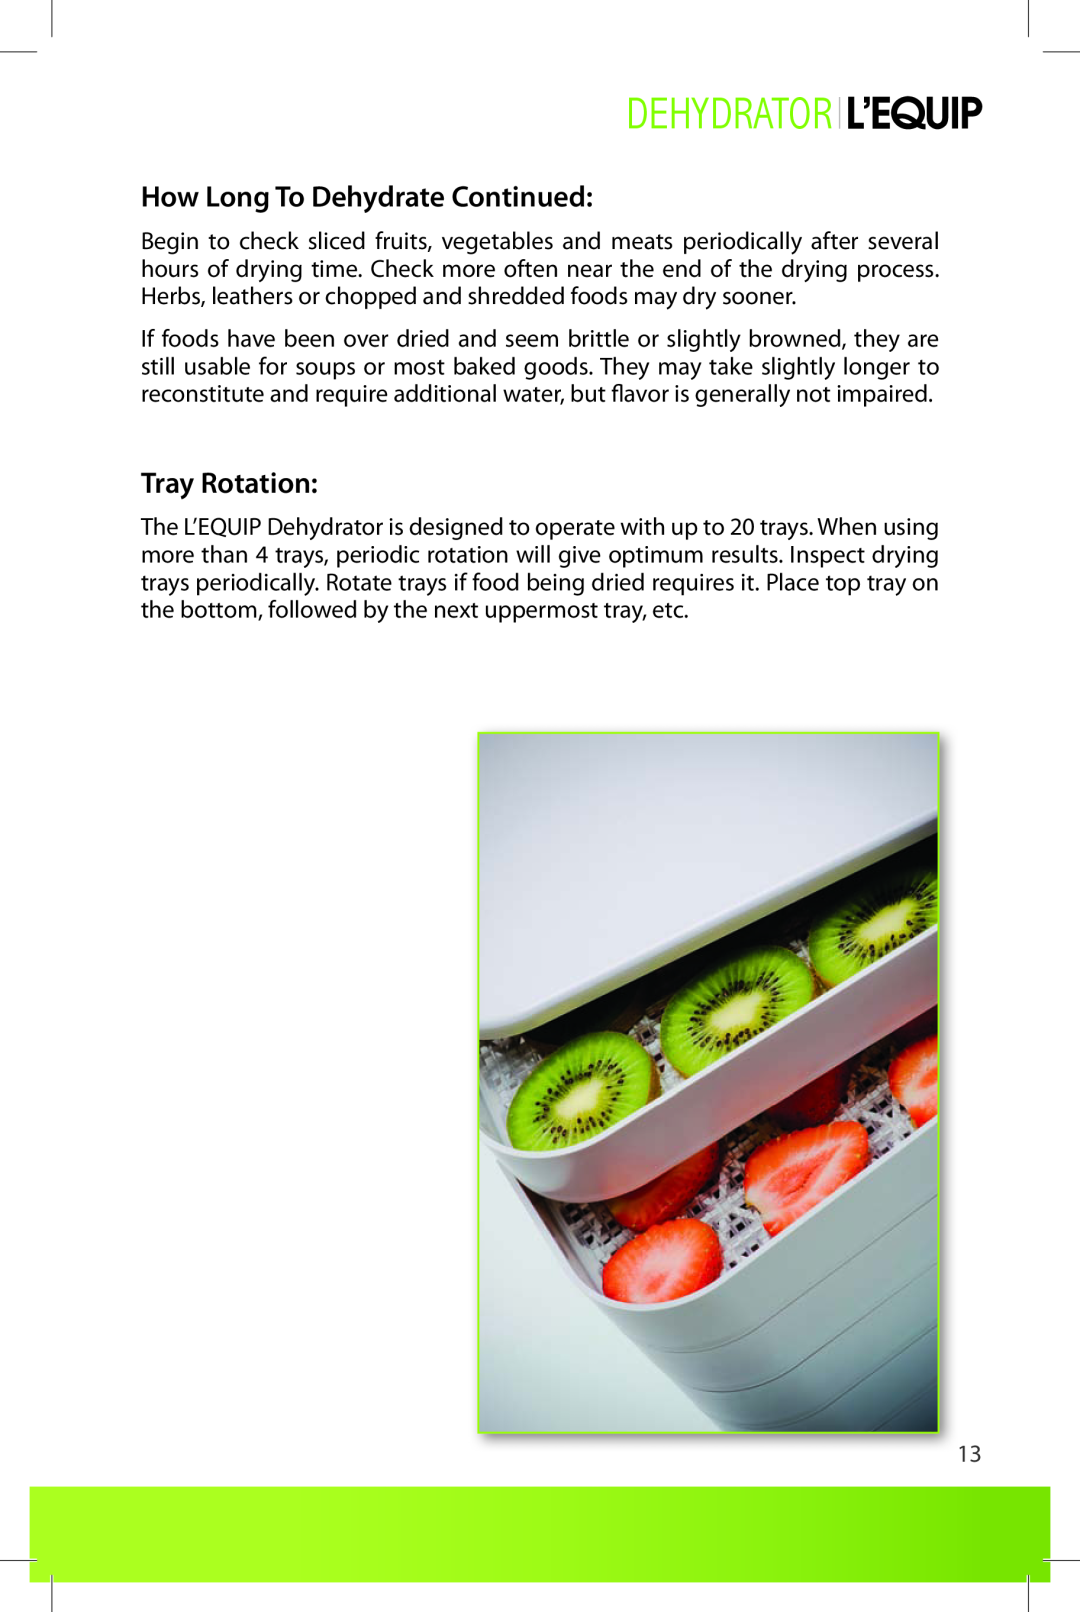 L'Equip 524, 528 manual How Long To Dehydrate Continued, Tray Rotation, Dehydrator 